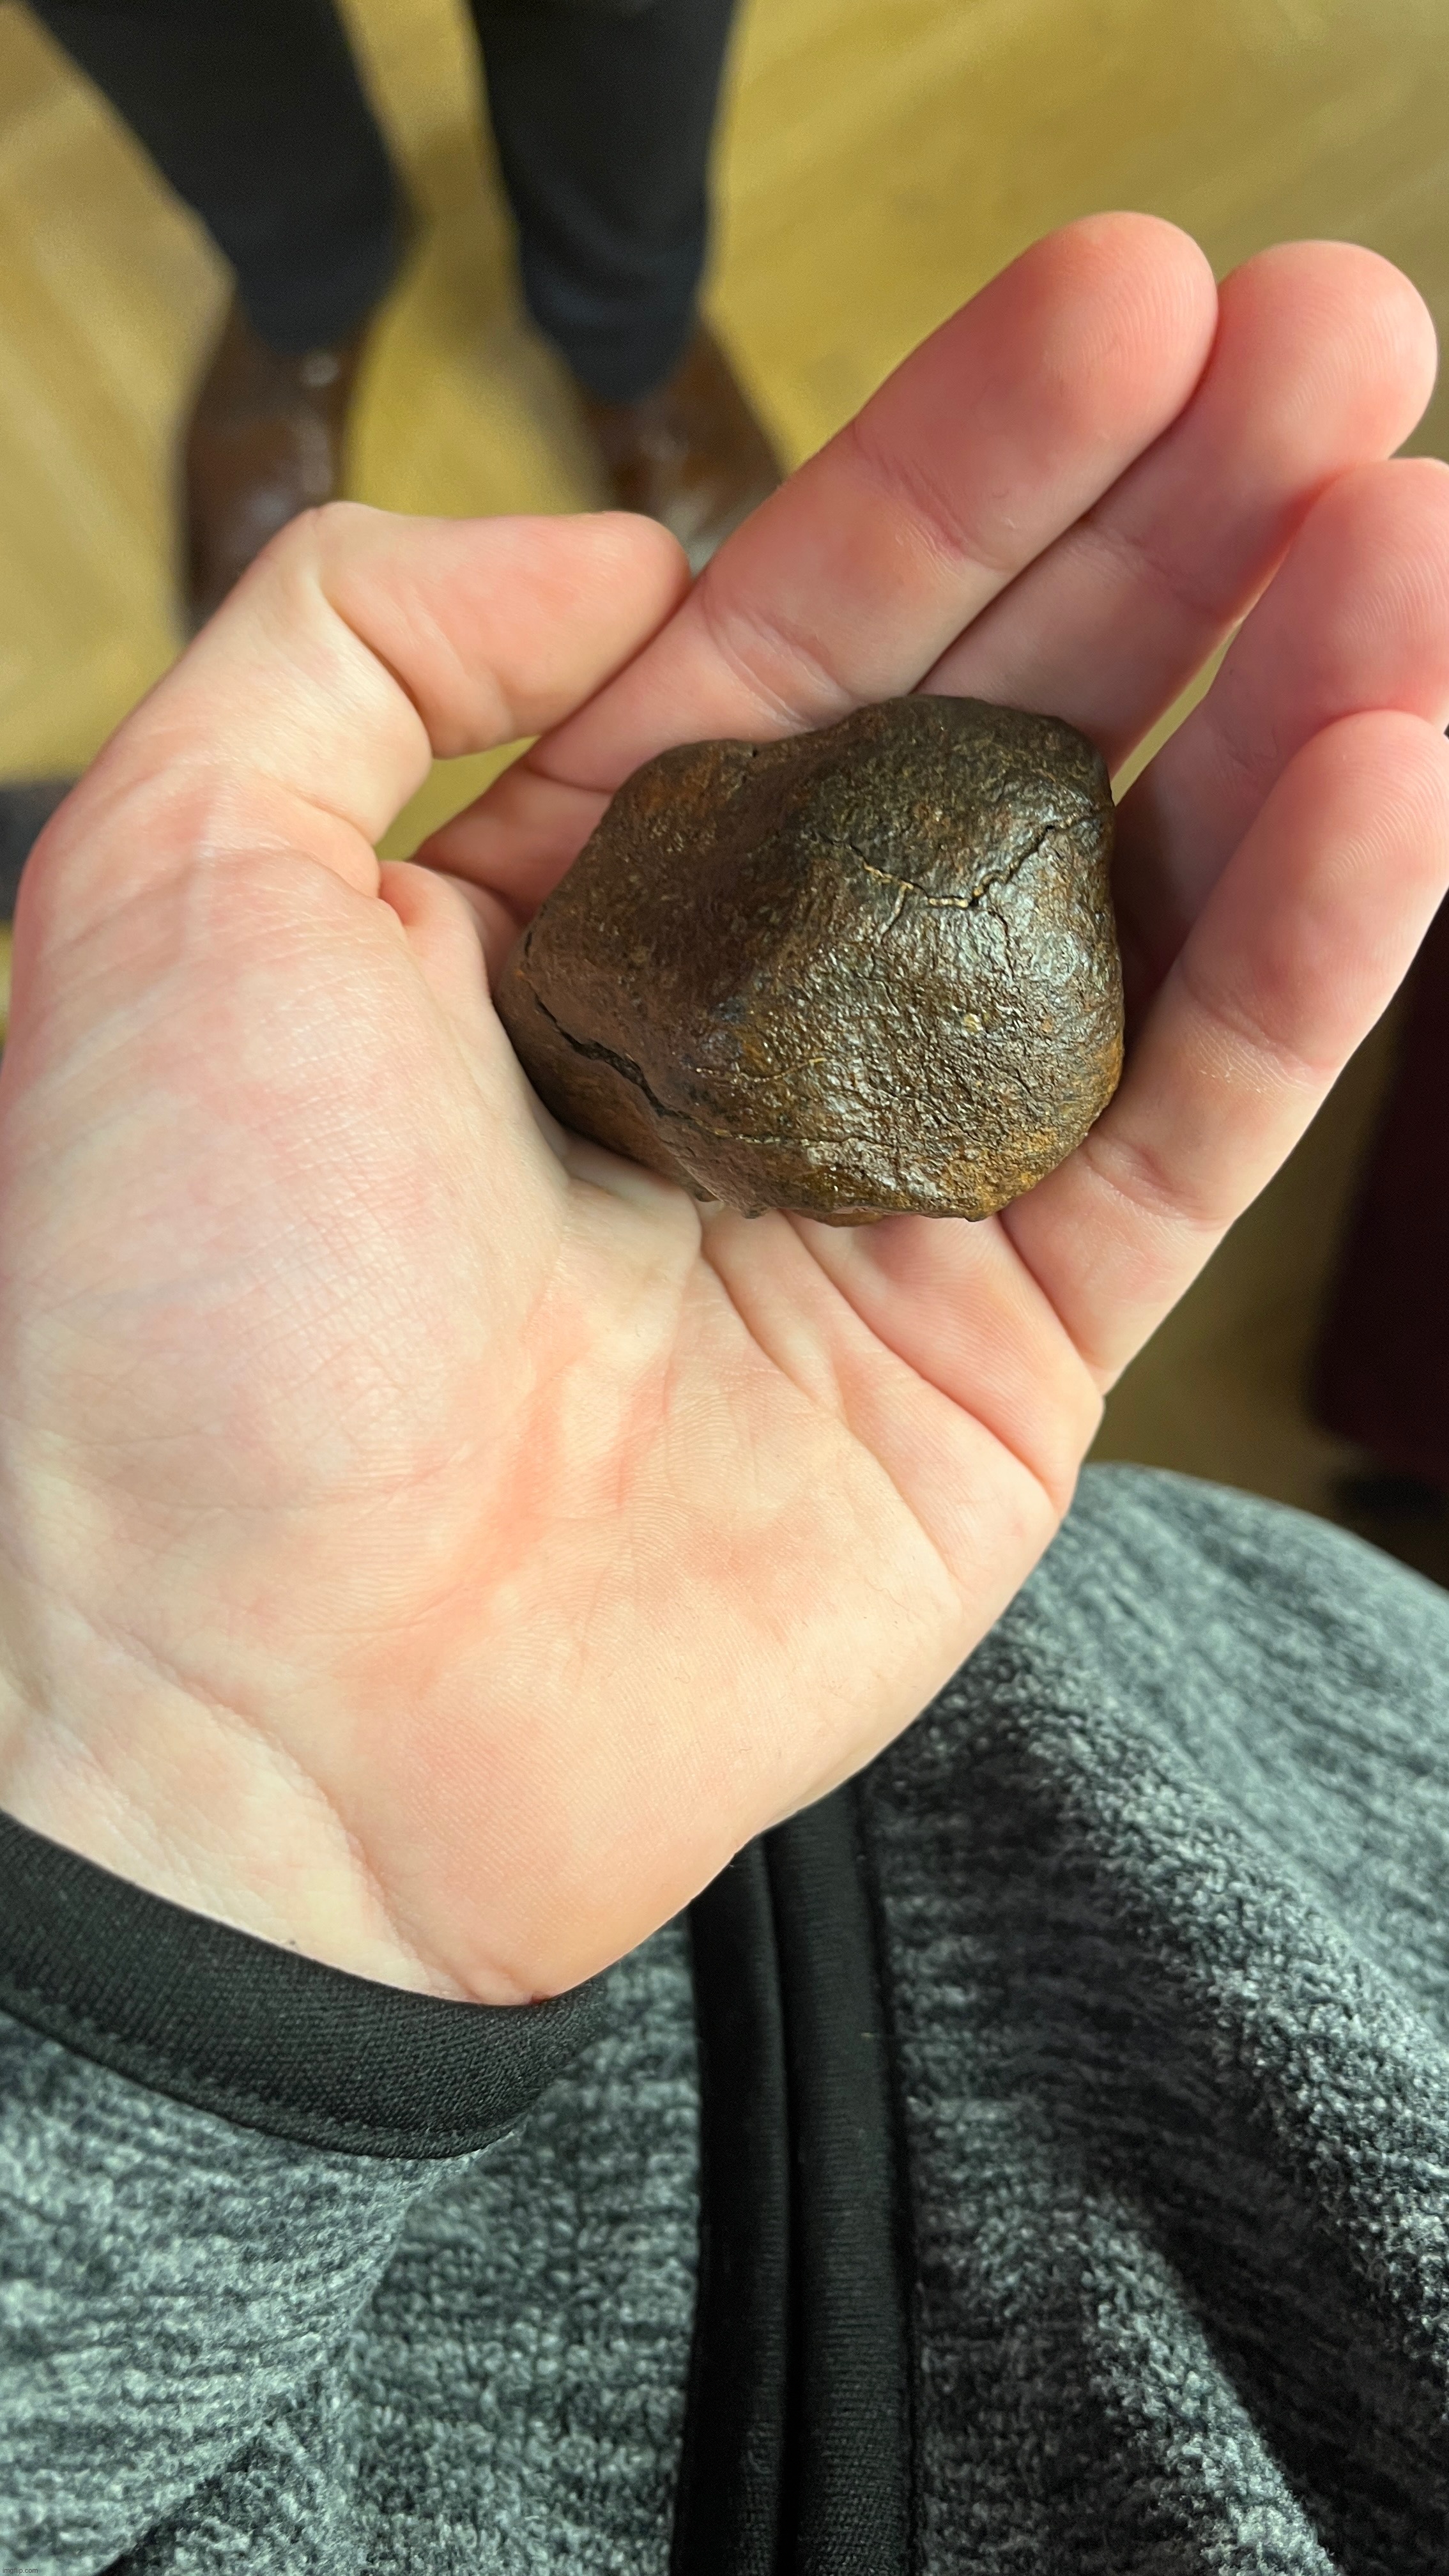 me holding a real meteorite #2: petrolpowered bunglejoo | image tagged in share your own photos,meteorite,meteor,rock,hand | made w/ Imgflip meme maker